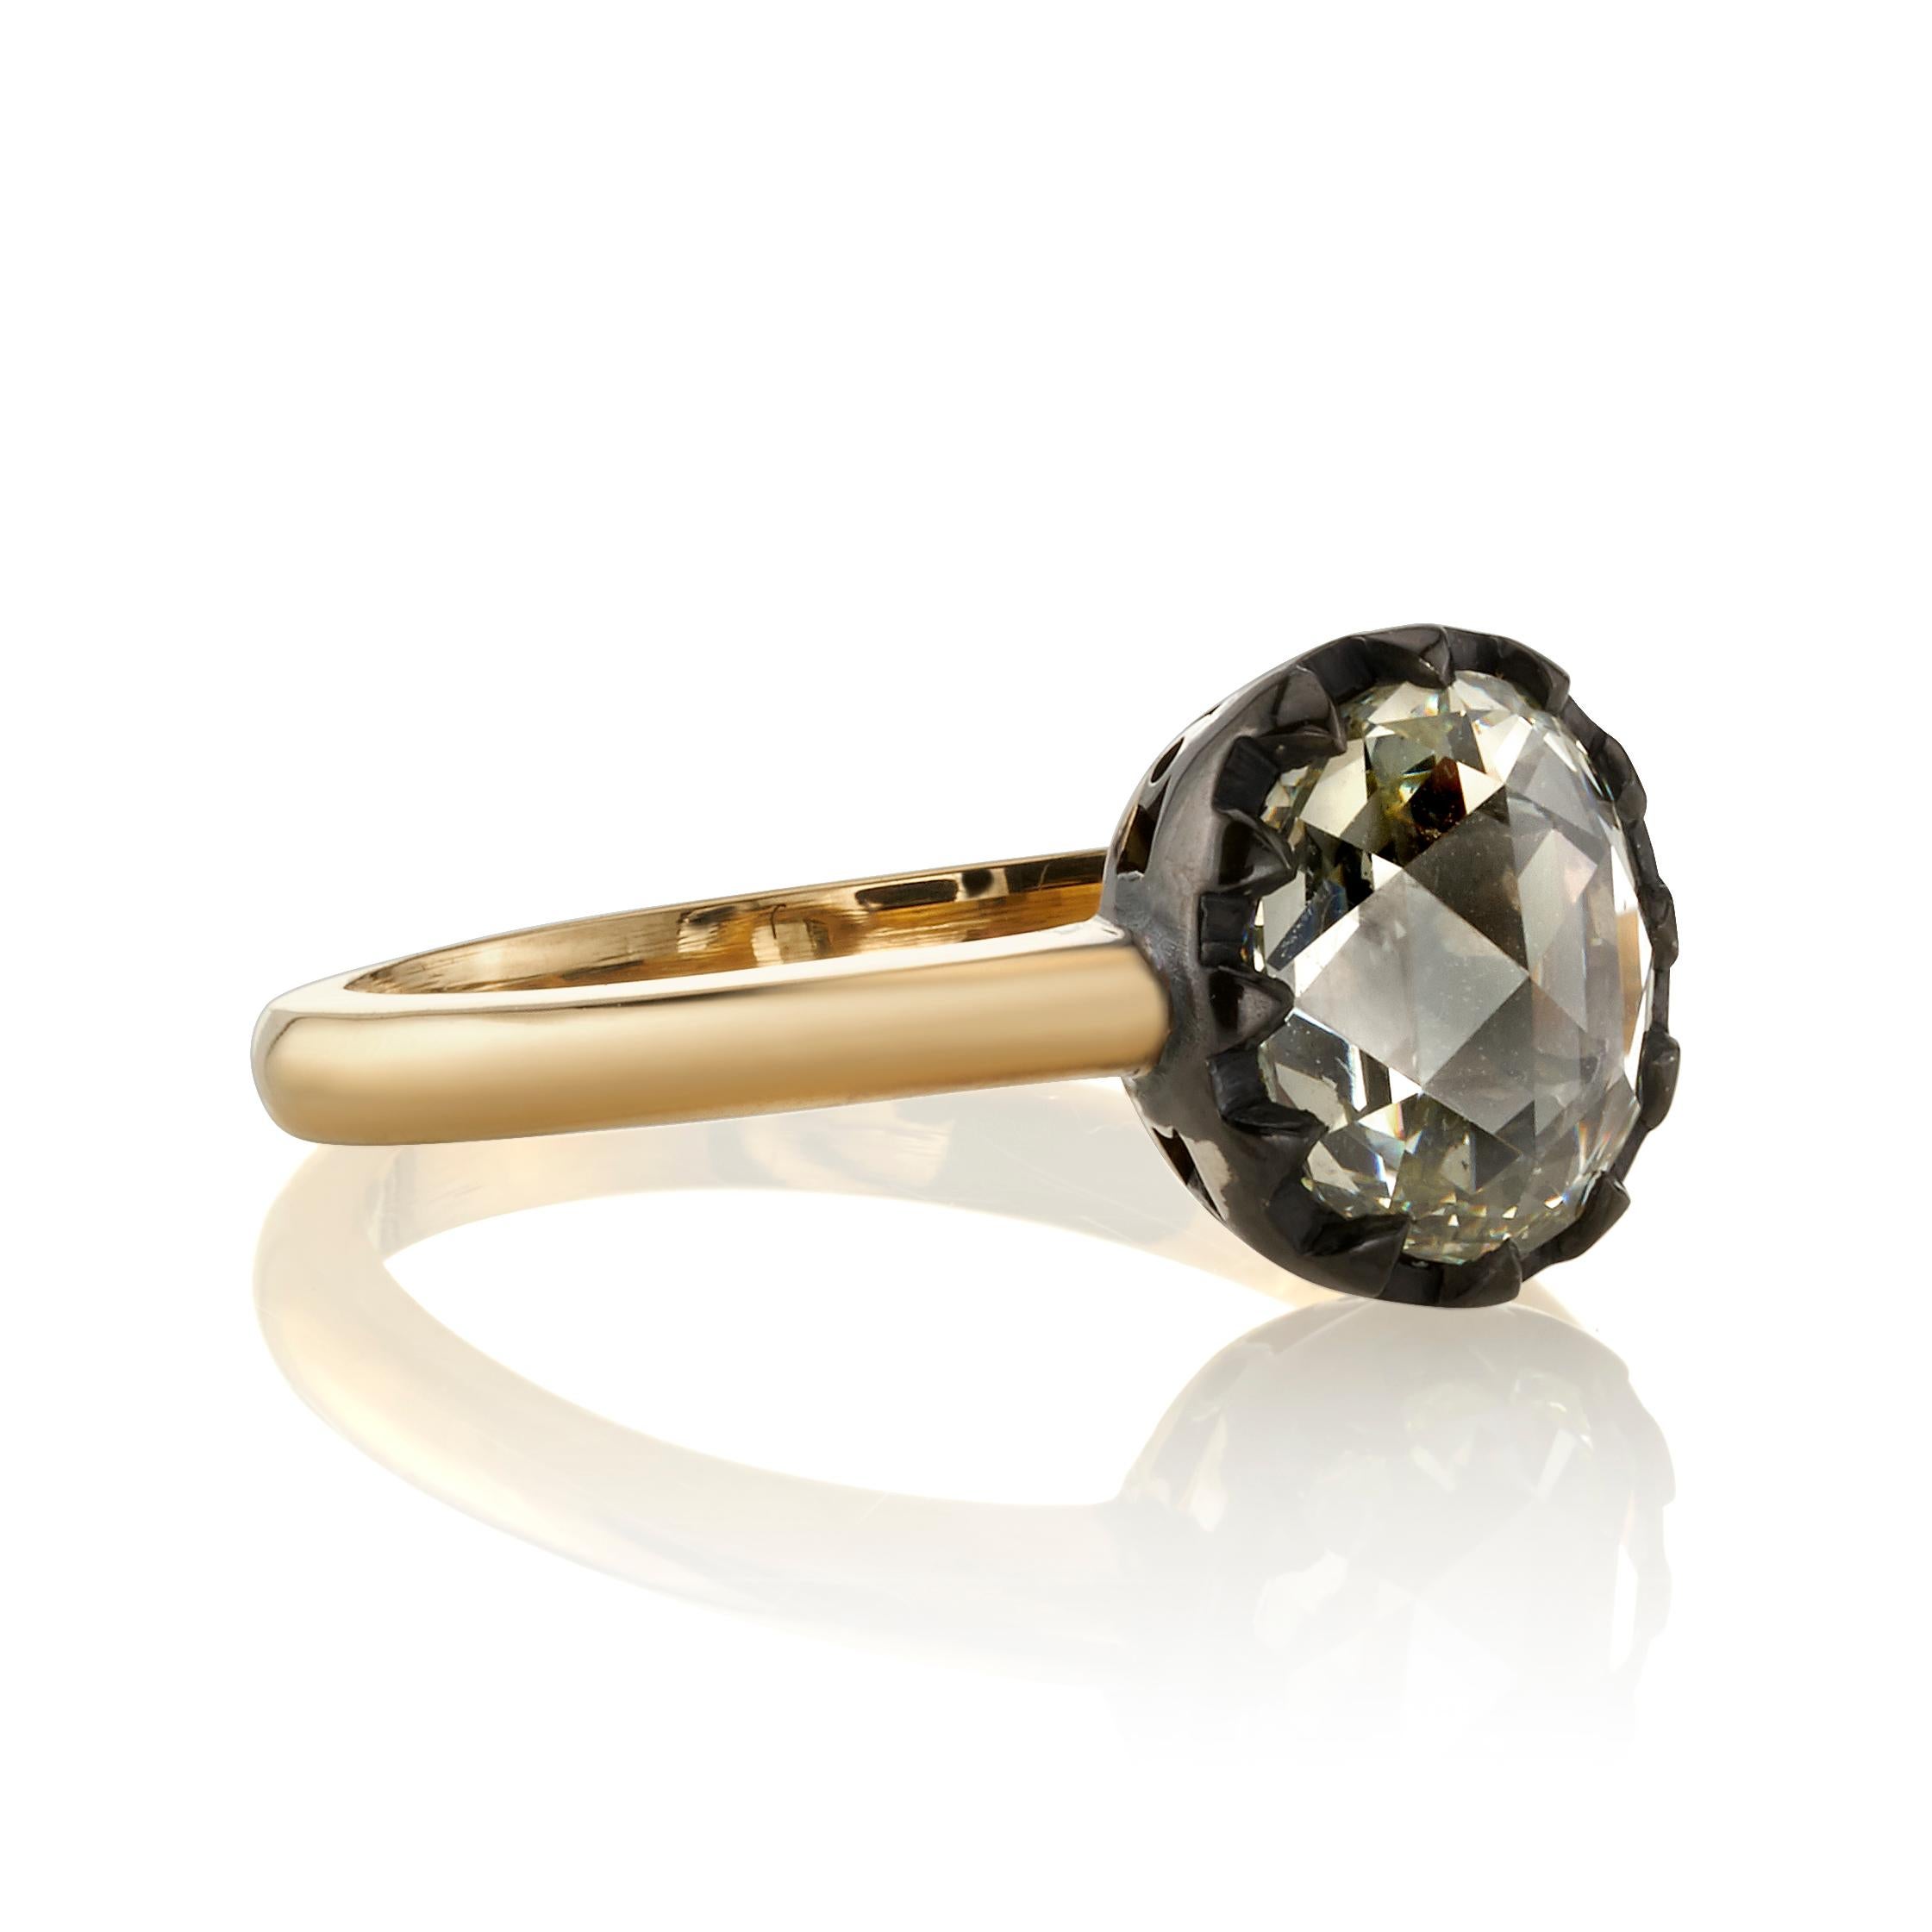 1.56ct L/SI2 GIA certified oval-shaped rose cut diamond set in a handcrafted 18k yellow gold and oxidized silver mounting. 

Ring is currently size 6. Please contact us about potential re-sizing.

Our jewelry is made locally in Los Angeles and most